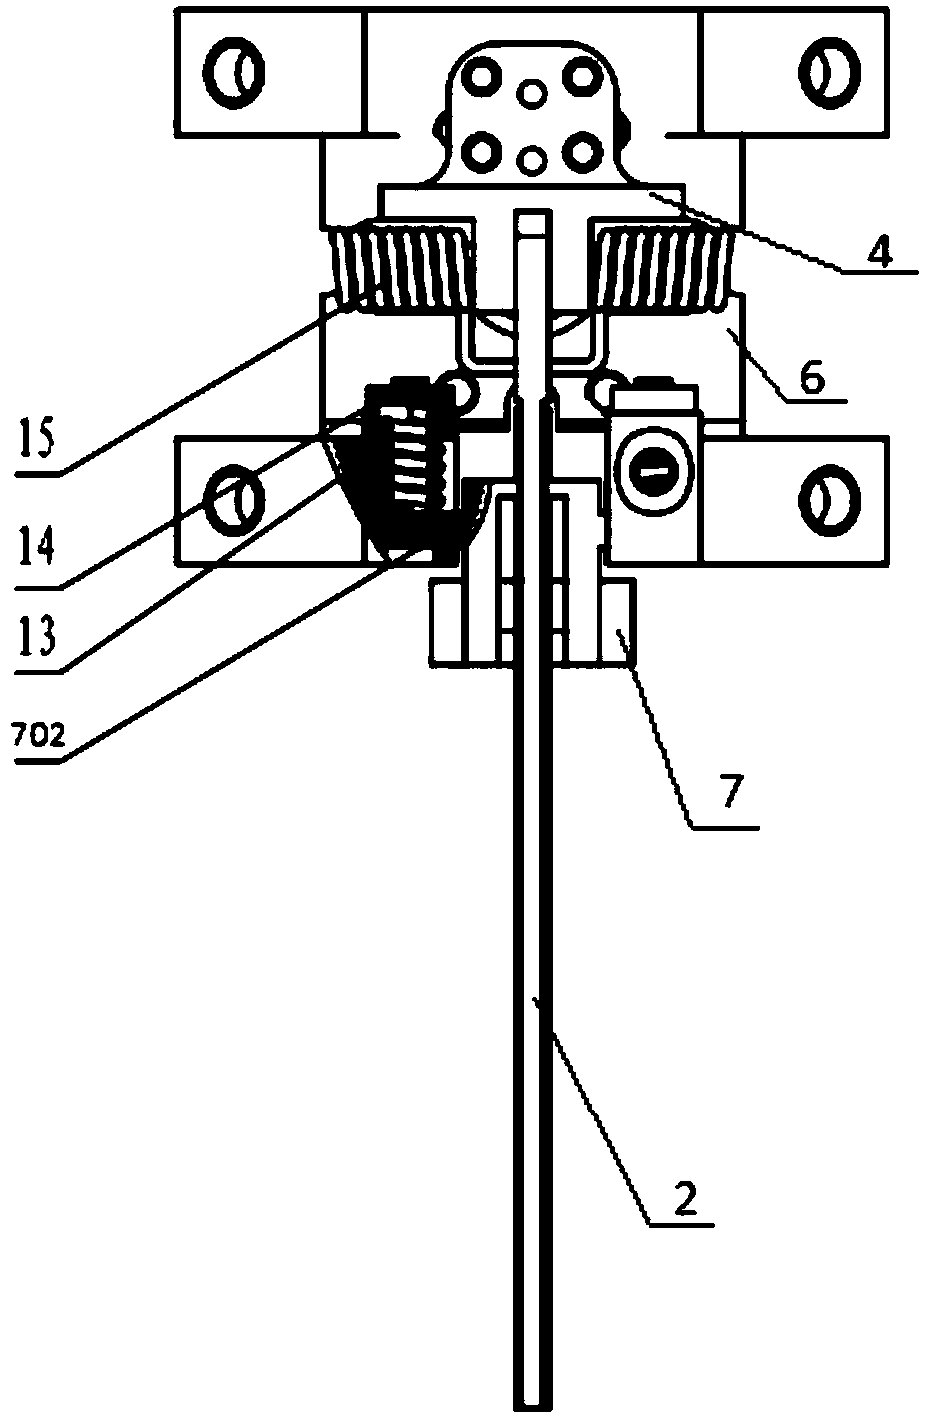 Delayed expansion mechanism for folding rudder sheets of small missile